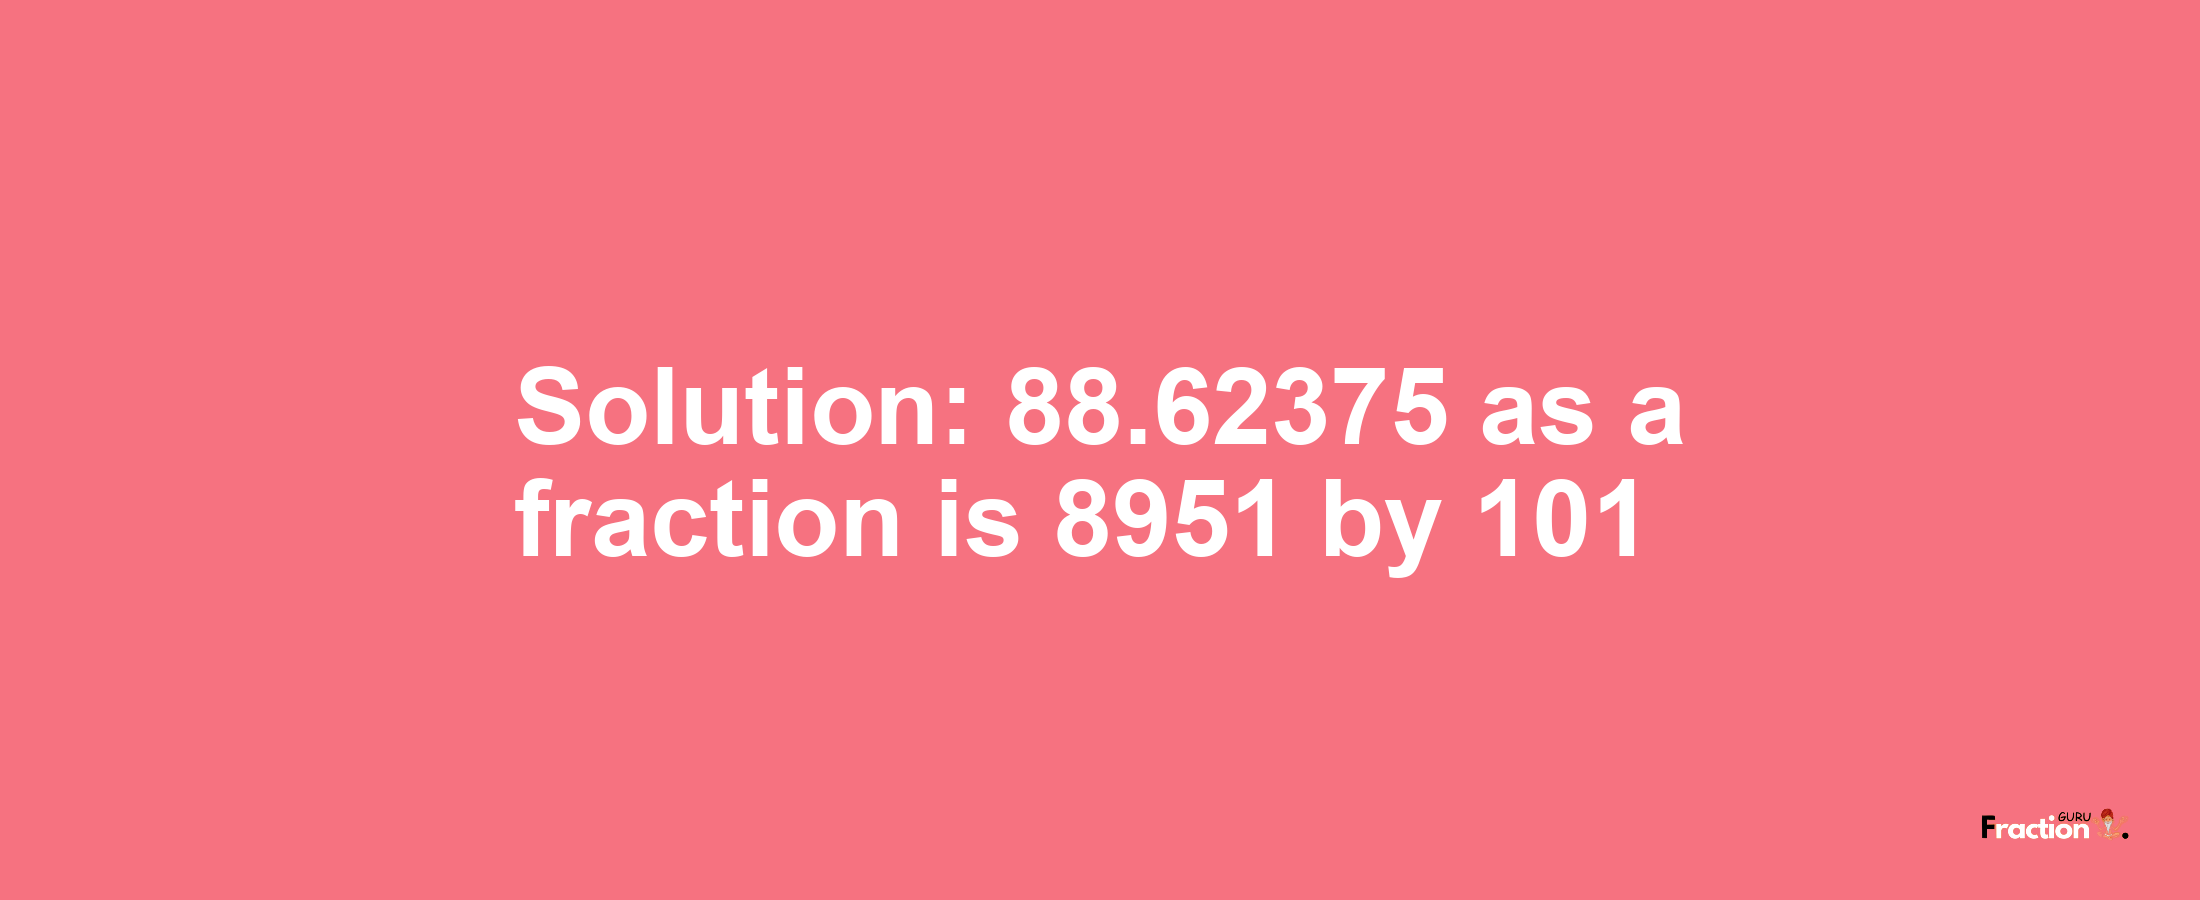 Solution:88.62375 as a fraction is 8951/101